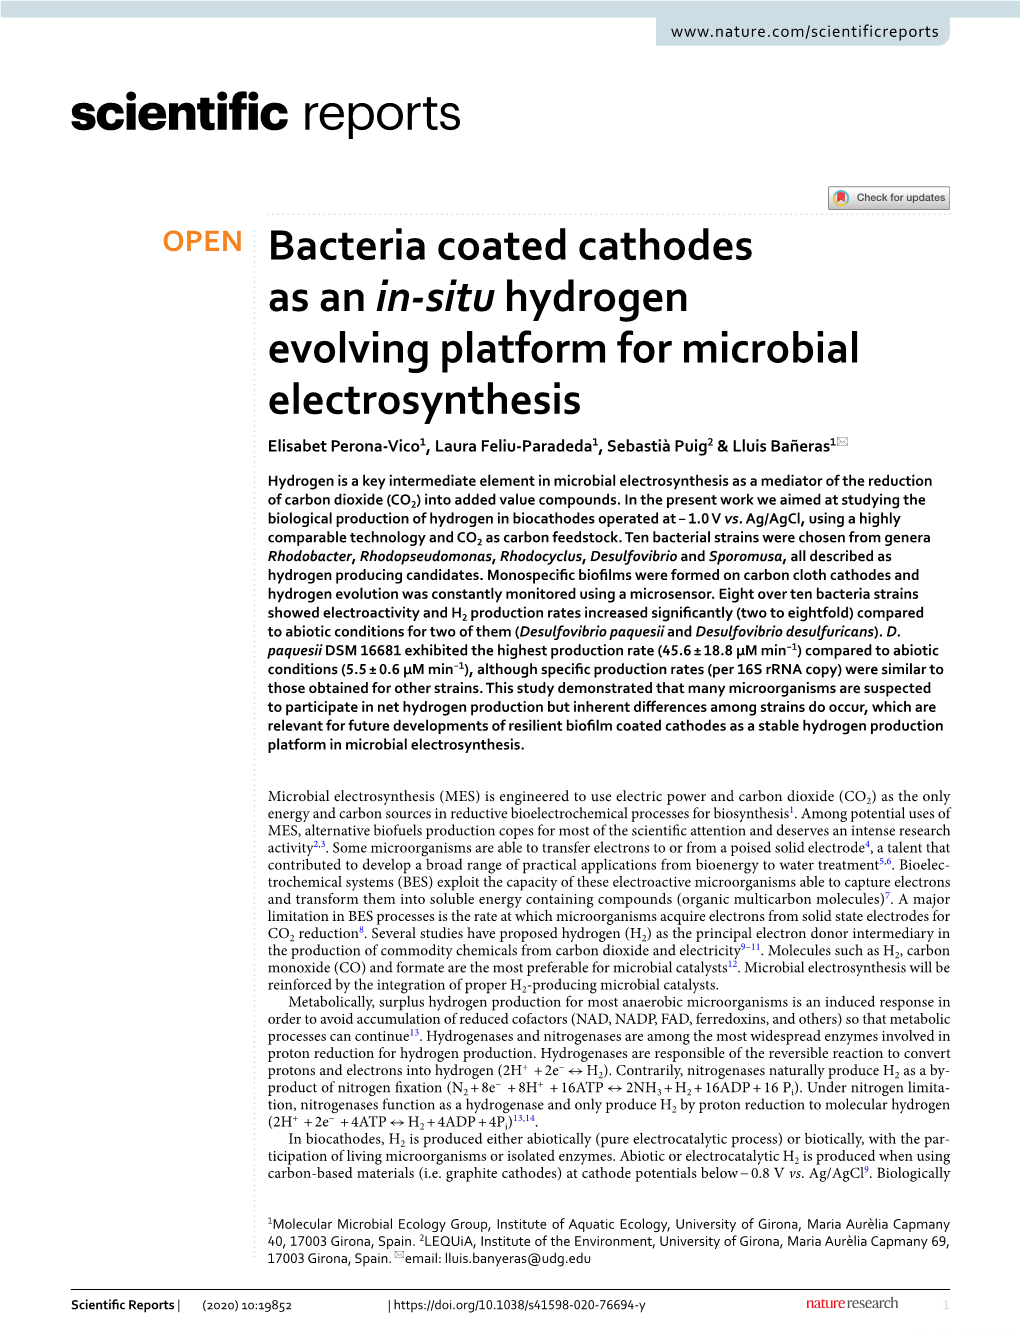 Bacteria Coated Cathodes As an In-Situ Hydrogen Evolving Platform for Microbial Electrosynthesis